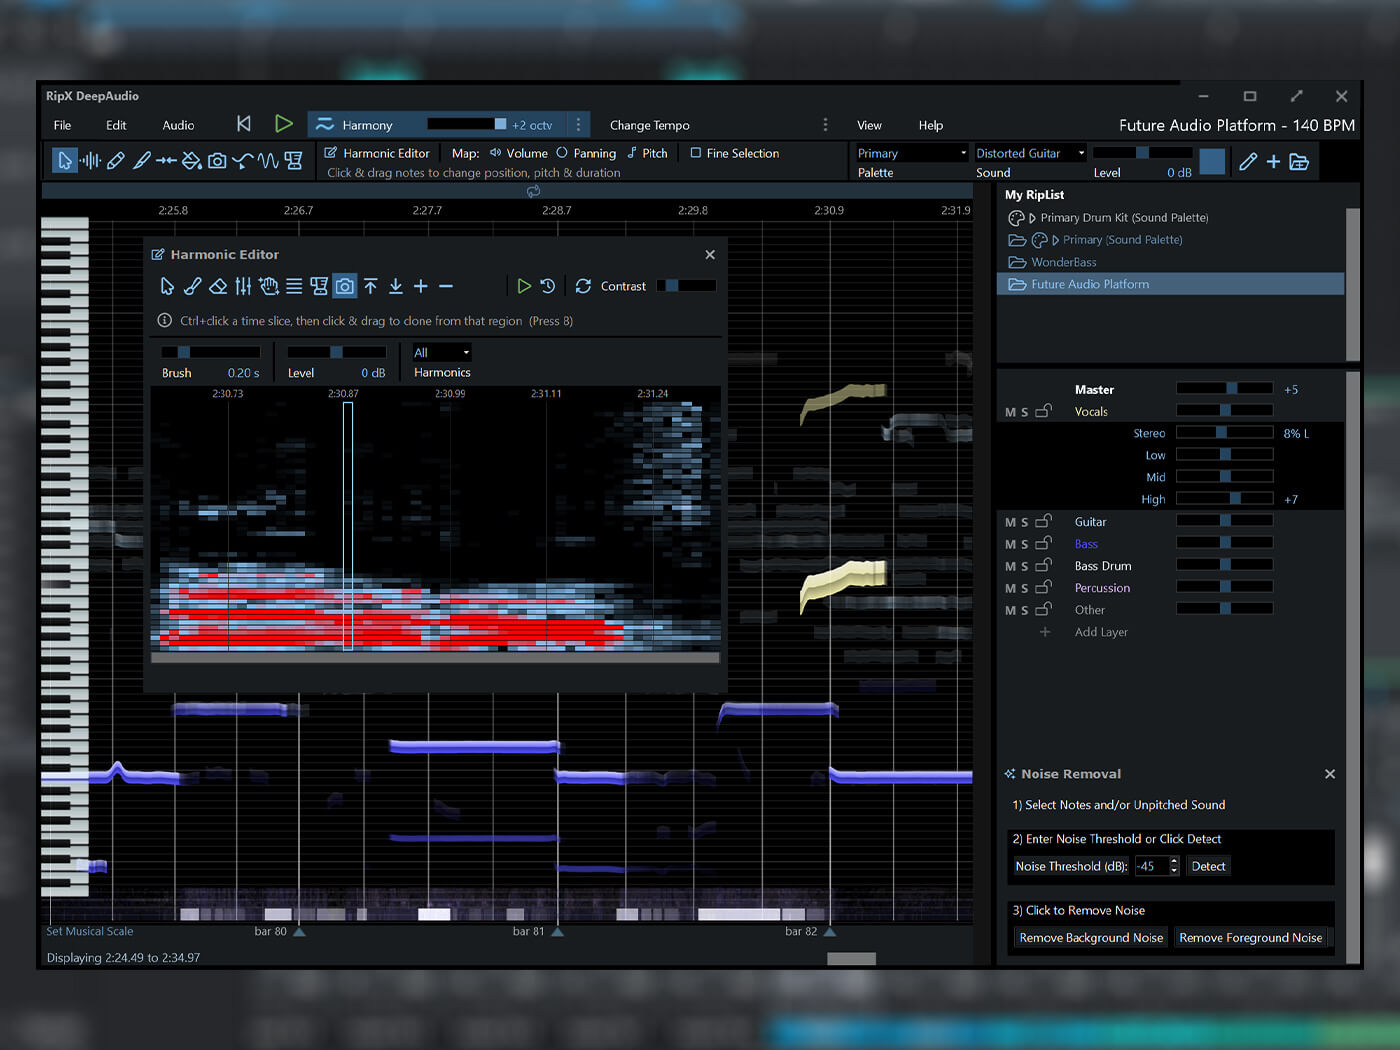 https://www.musictech.net/news/extract-vocals-and-backing-tracks-as-stems-from-any-audio-file-with-hitnmixs-ripx/